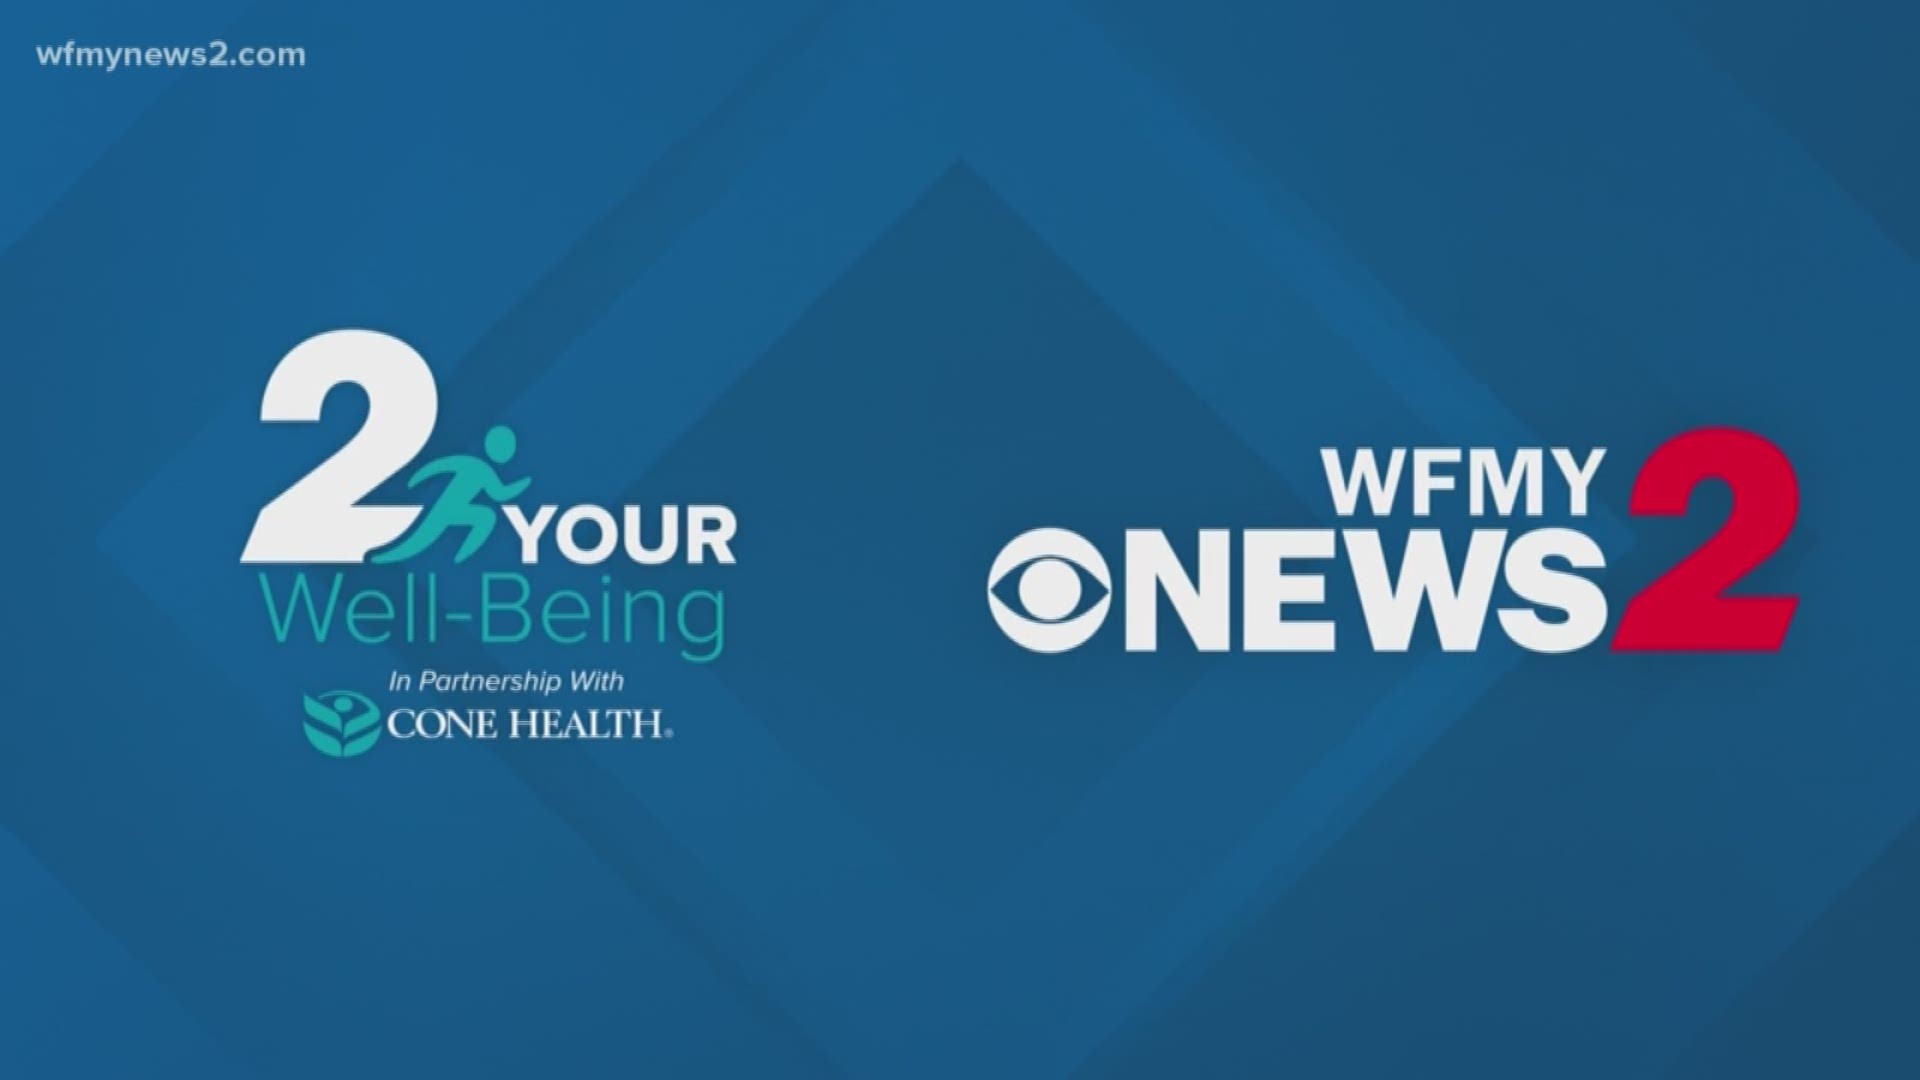 Melissa Leonard, a registered dietician with Cone Health, talks about summer nutrition in this 2 Your Well-Being segment.